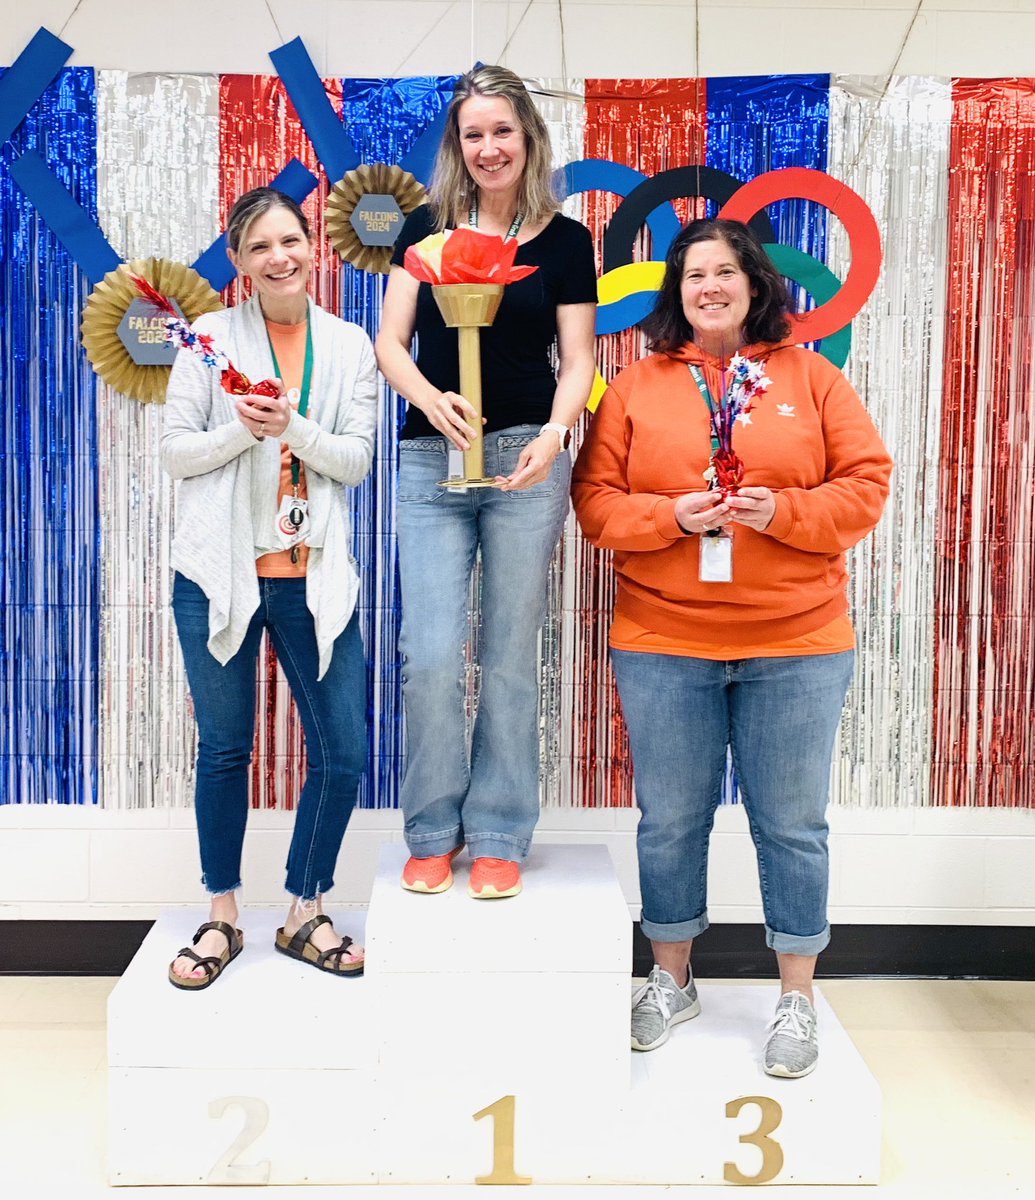 Happy to share the podium with these two colleagues today! I’m very sorry that I jumped in the first place spot before inviting you for a photo 😂 #dg58pride #3sHappy25 #fa58share #dg58third